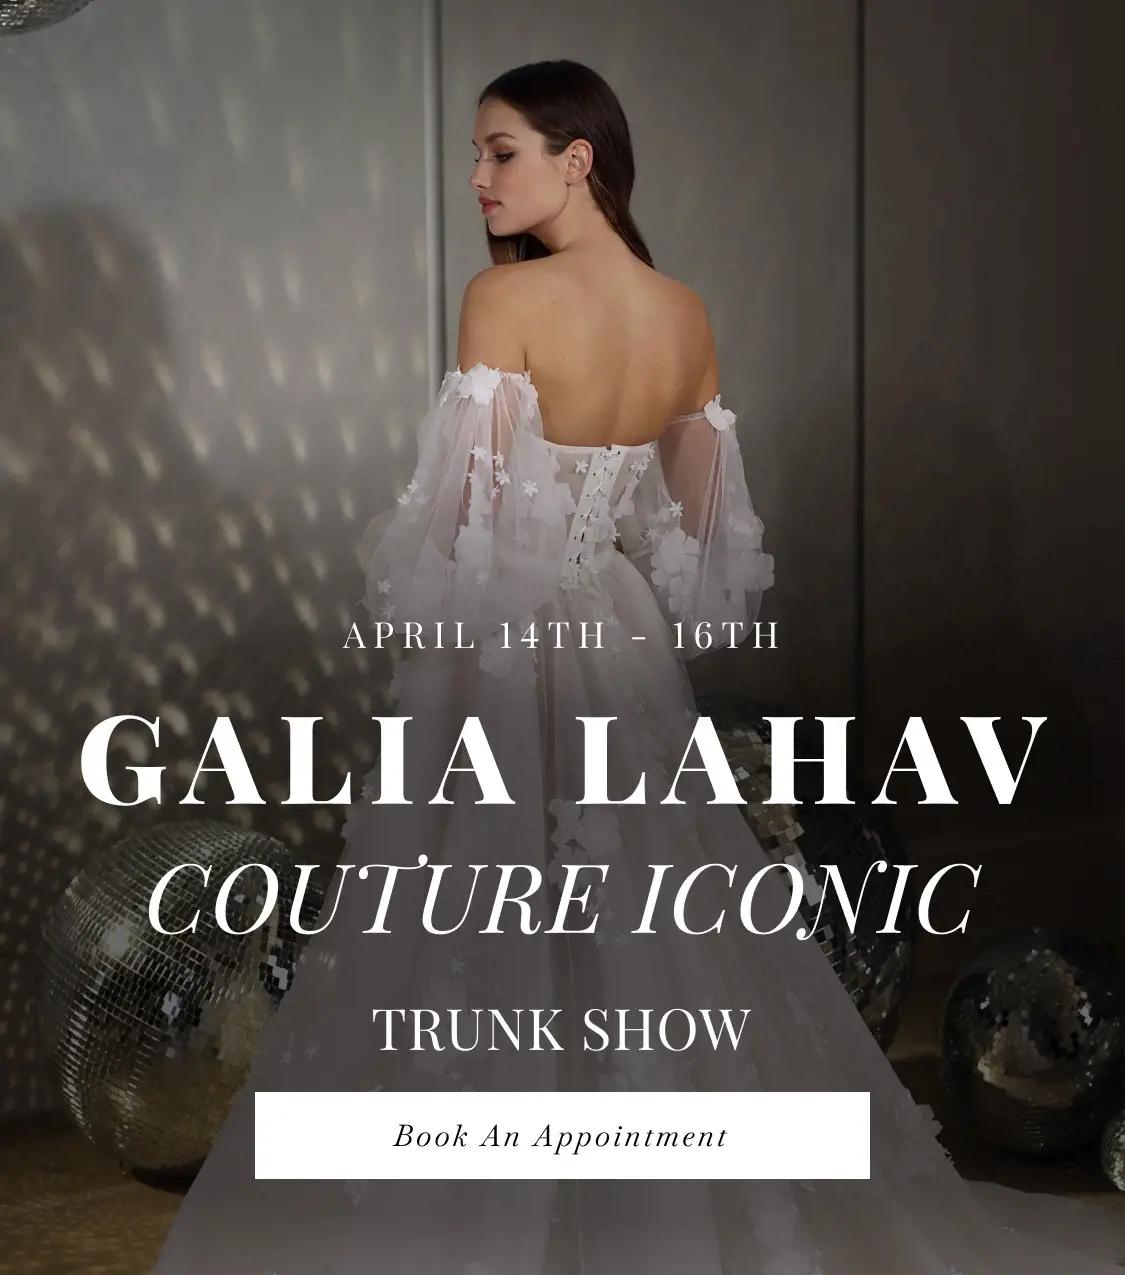 "Galia Lahav Couture Iconic Trunk Show" banner for mobile